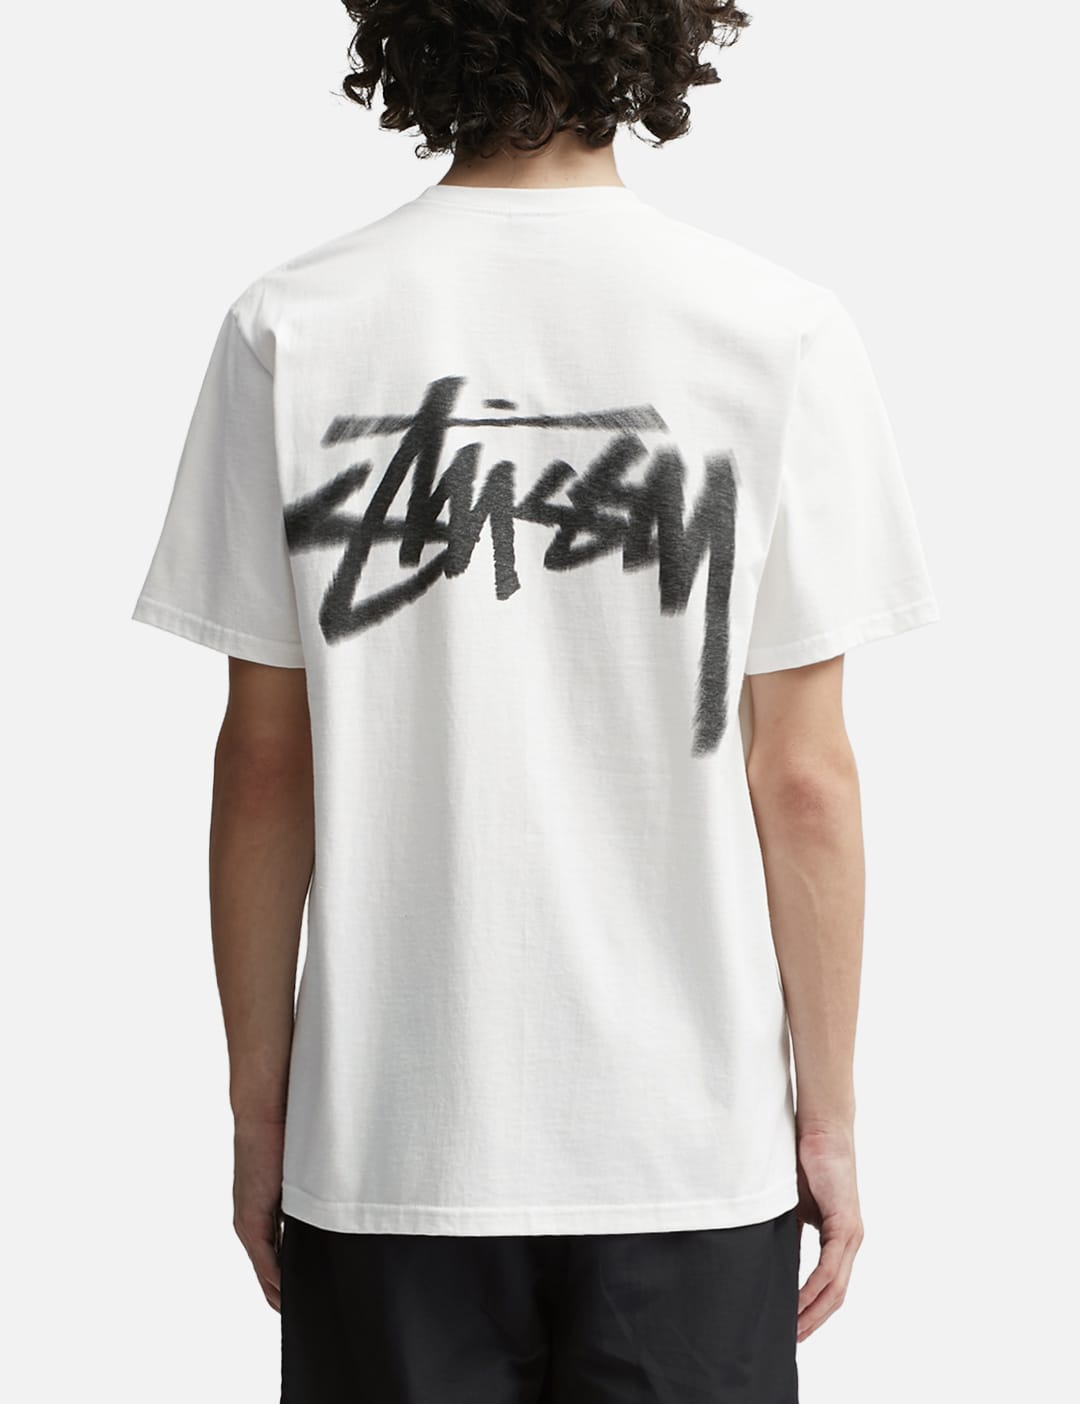 Stüssy - Dizzy Stock T-shirt | HBX - Globally Curated Fashion and